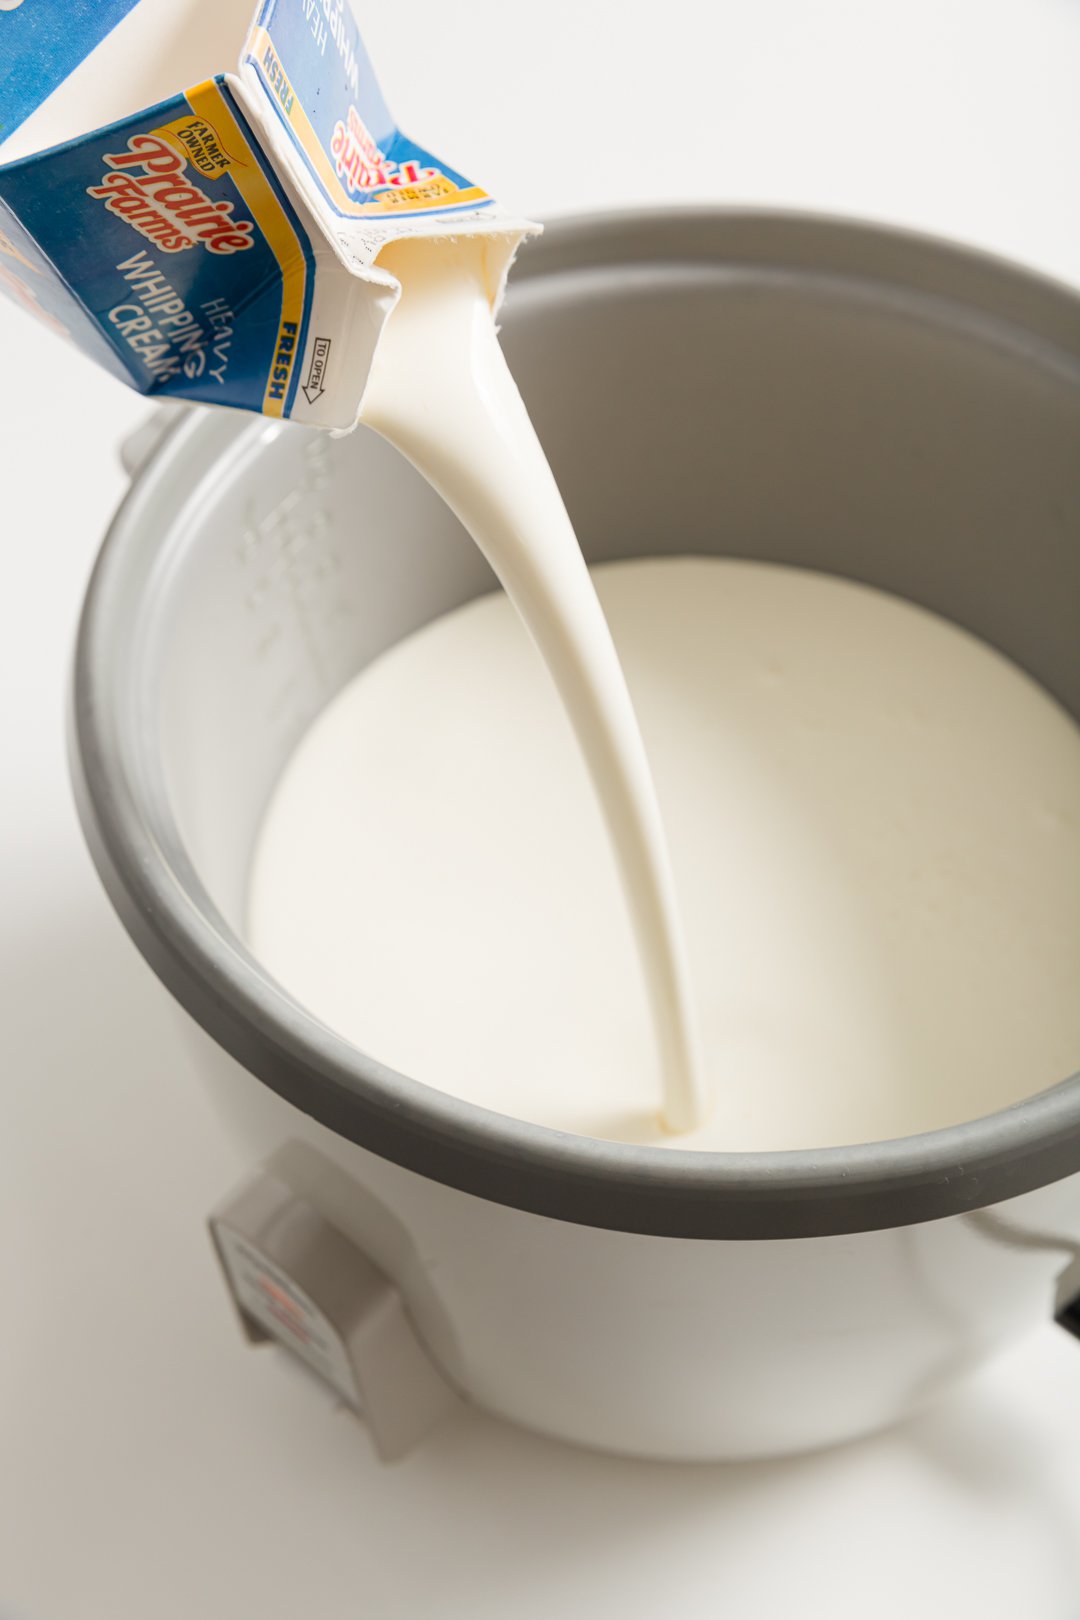 Heavy whipping cream being poured into a rice cooker